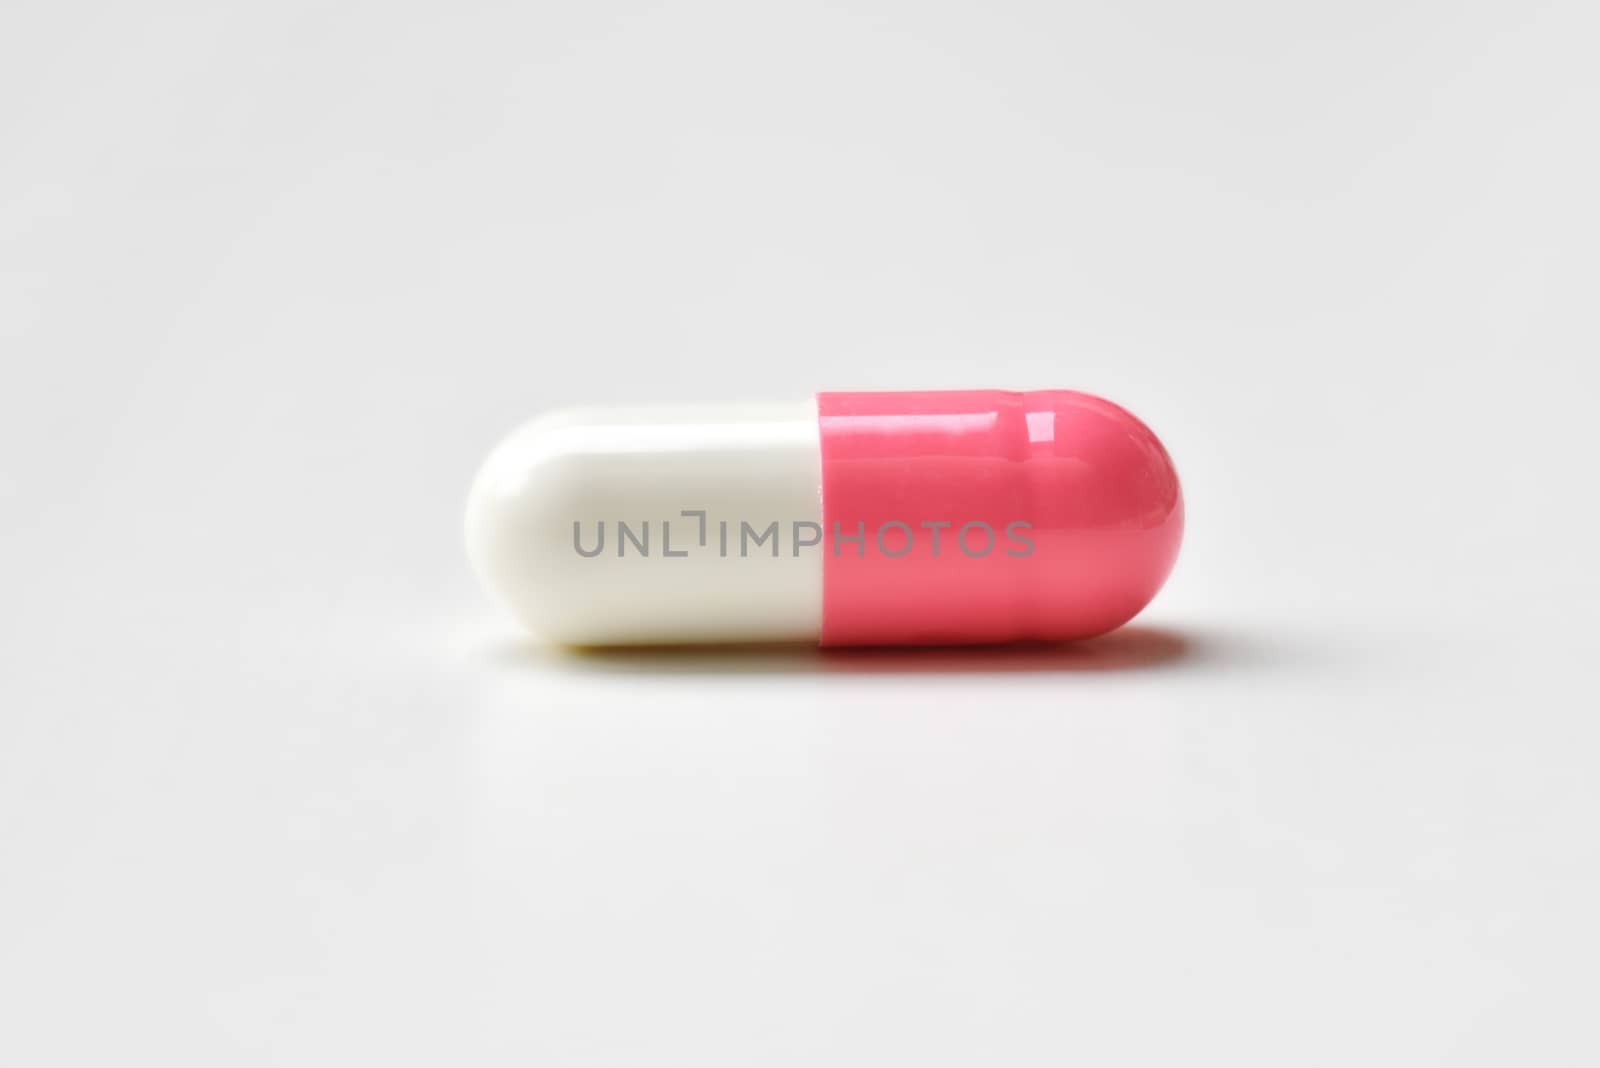 Pharmaceutical medicine pills, tablets and capsules pink-white o by C_Aphirak